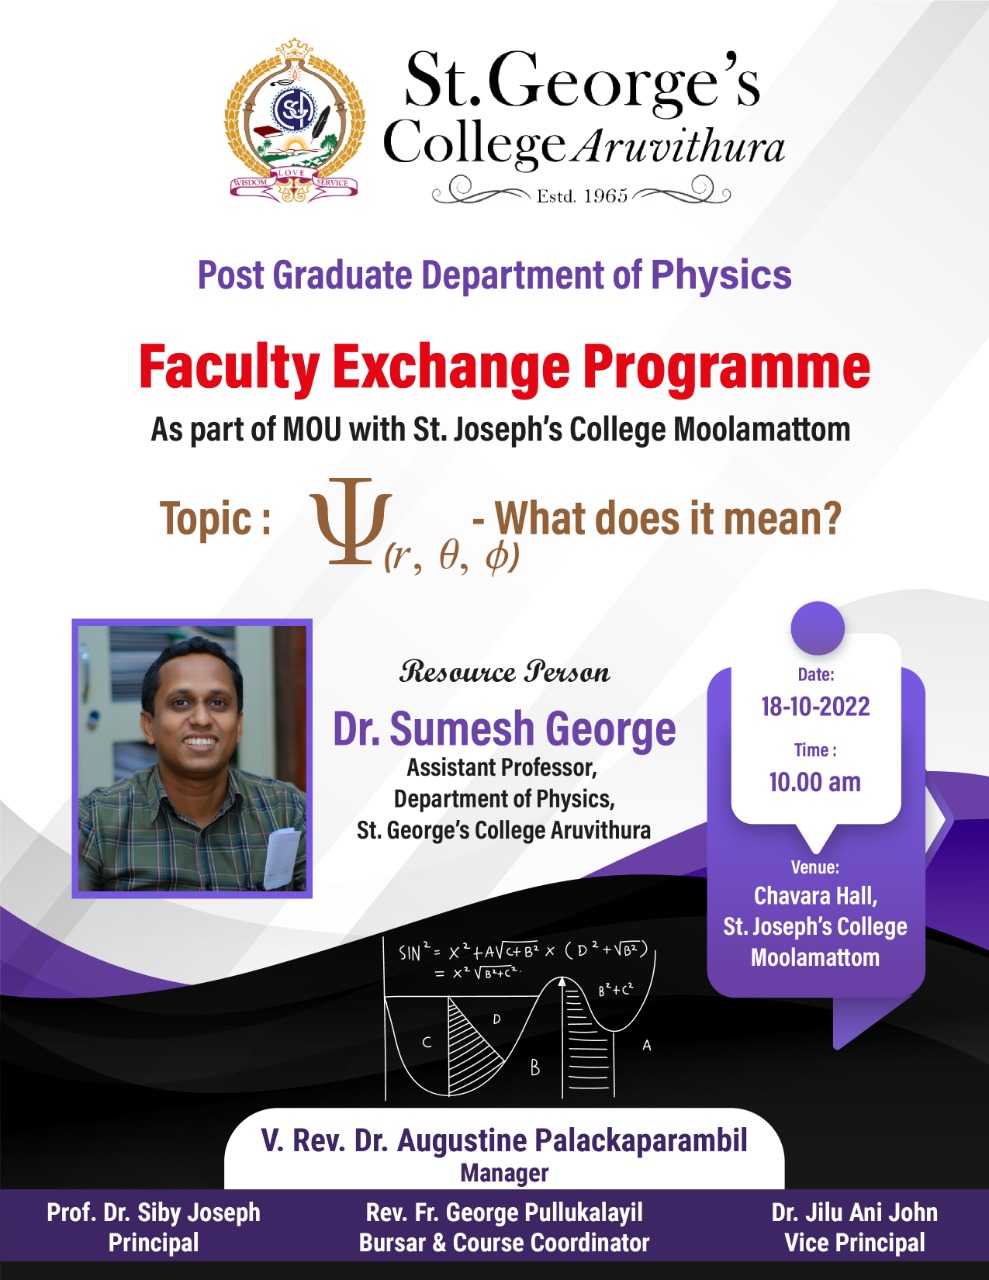 Faculty Exchange Programme - PG Department of Physics